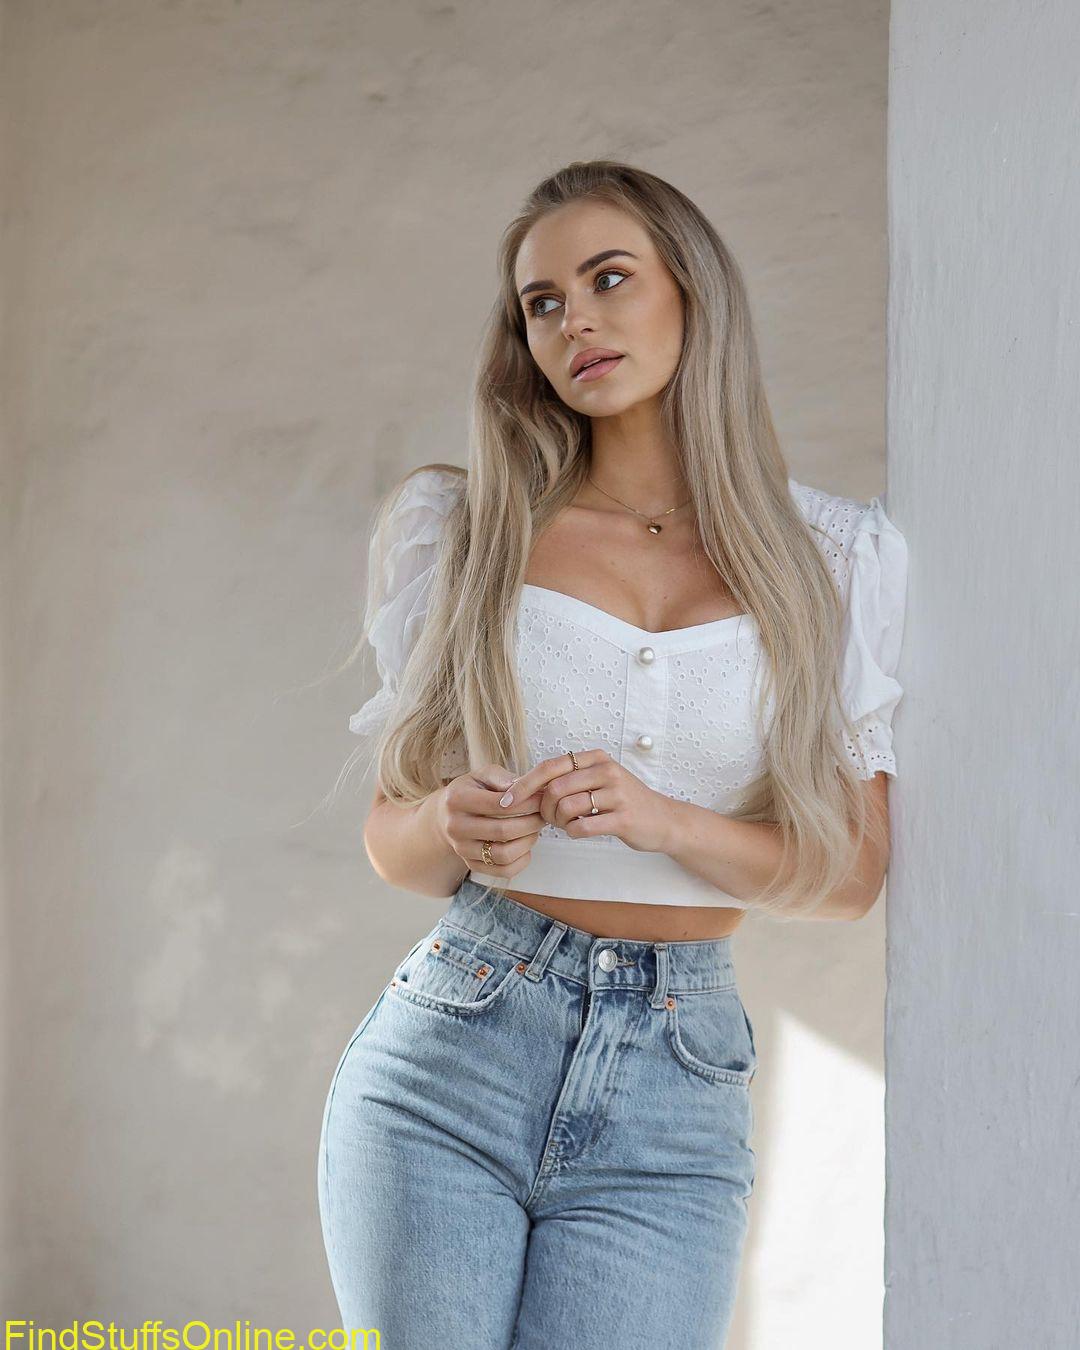 model anna Nystrom hot images 10